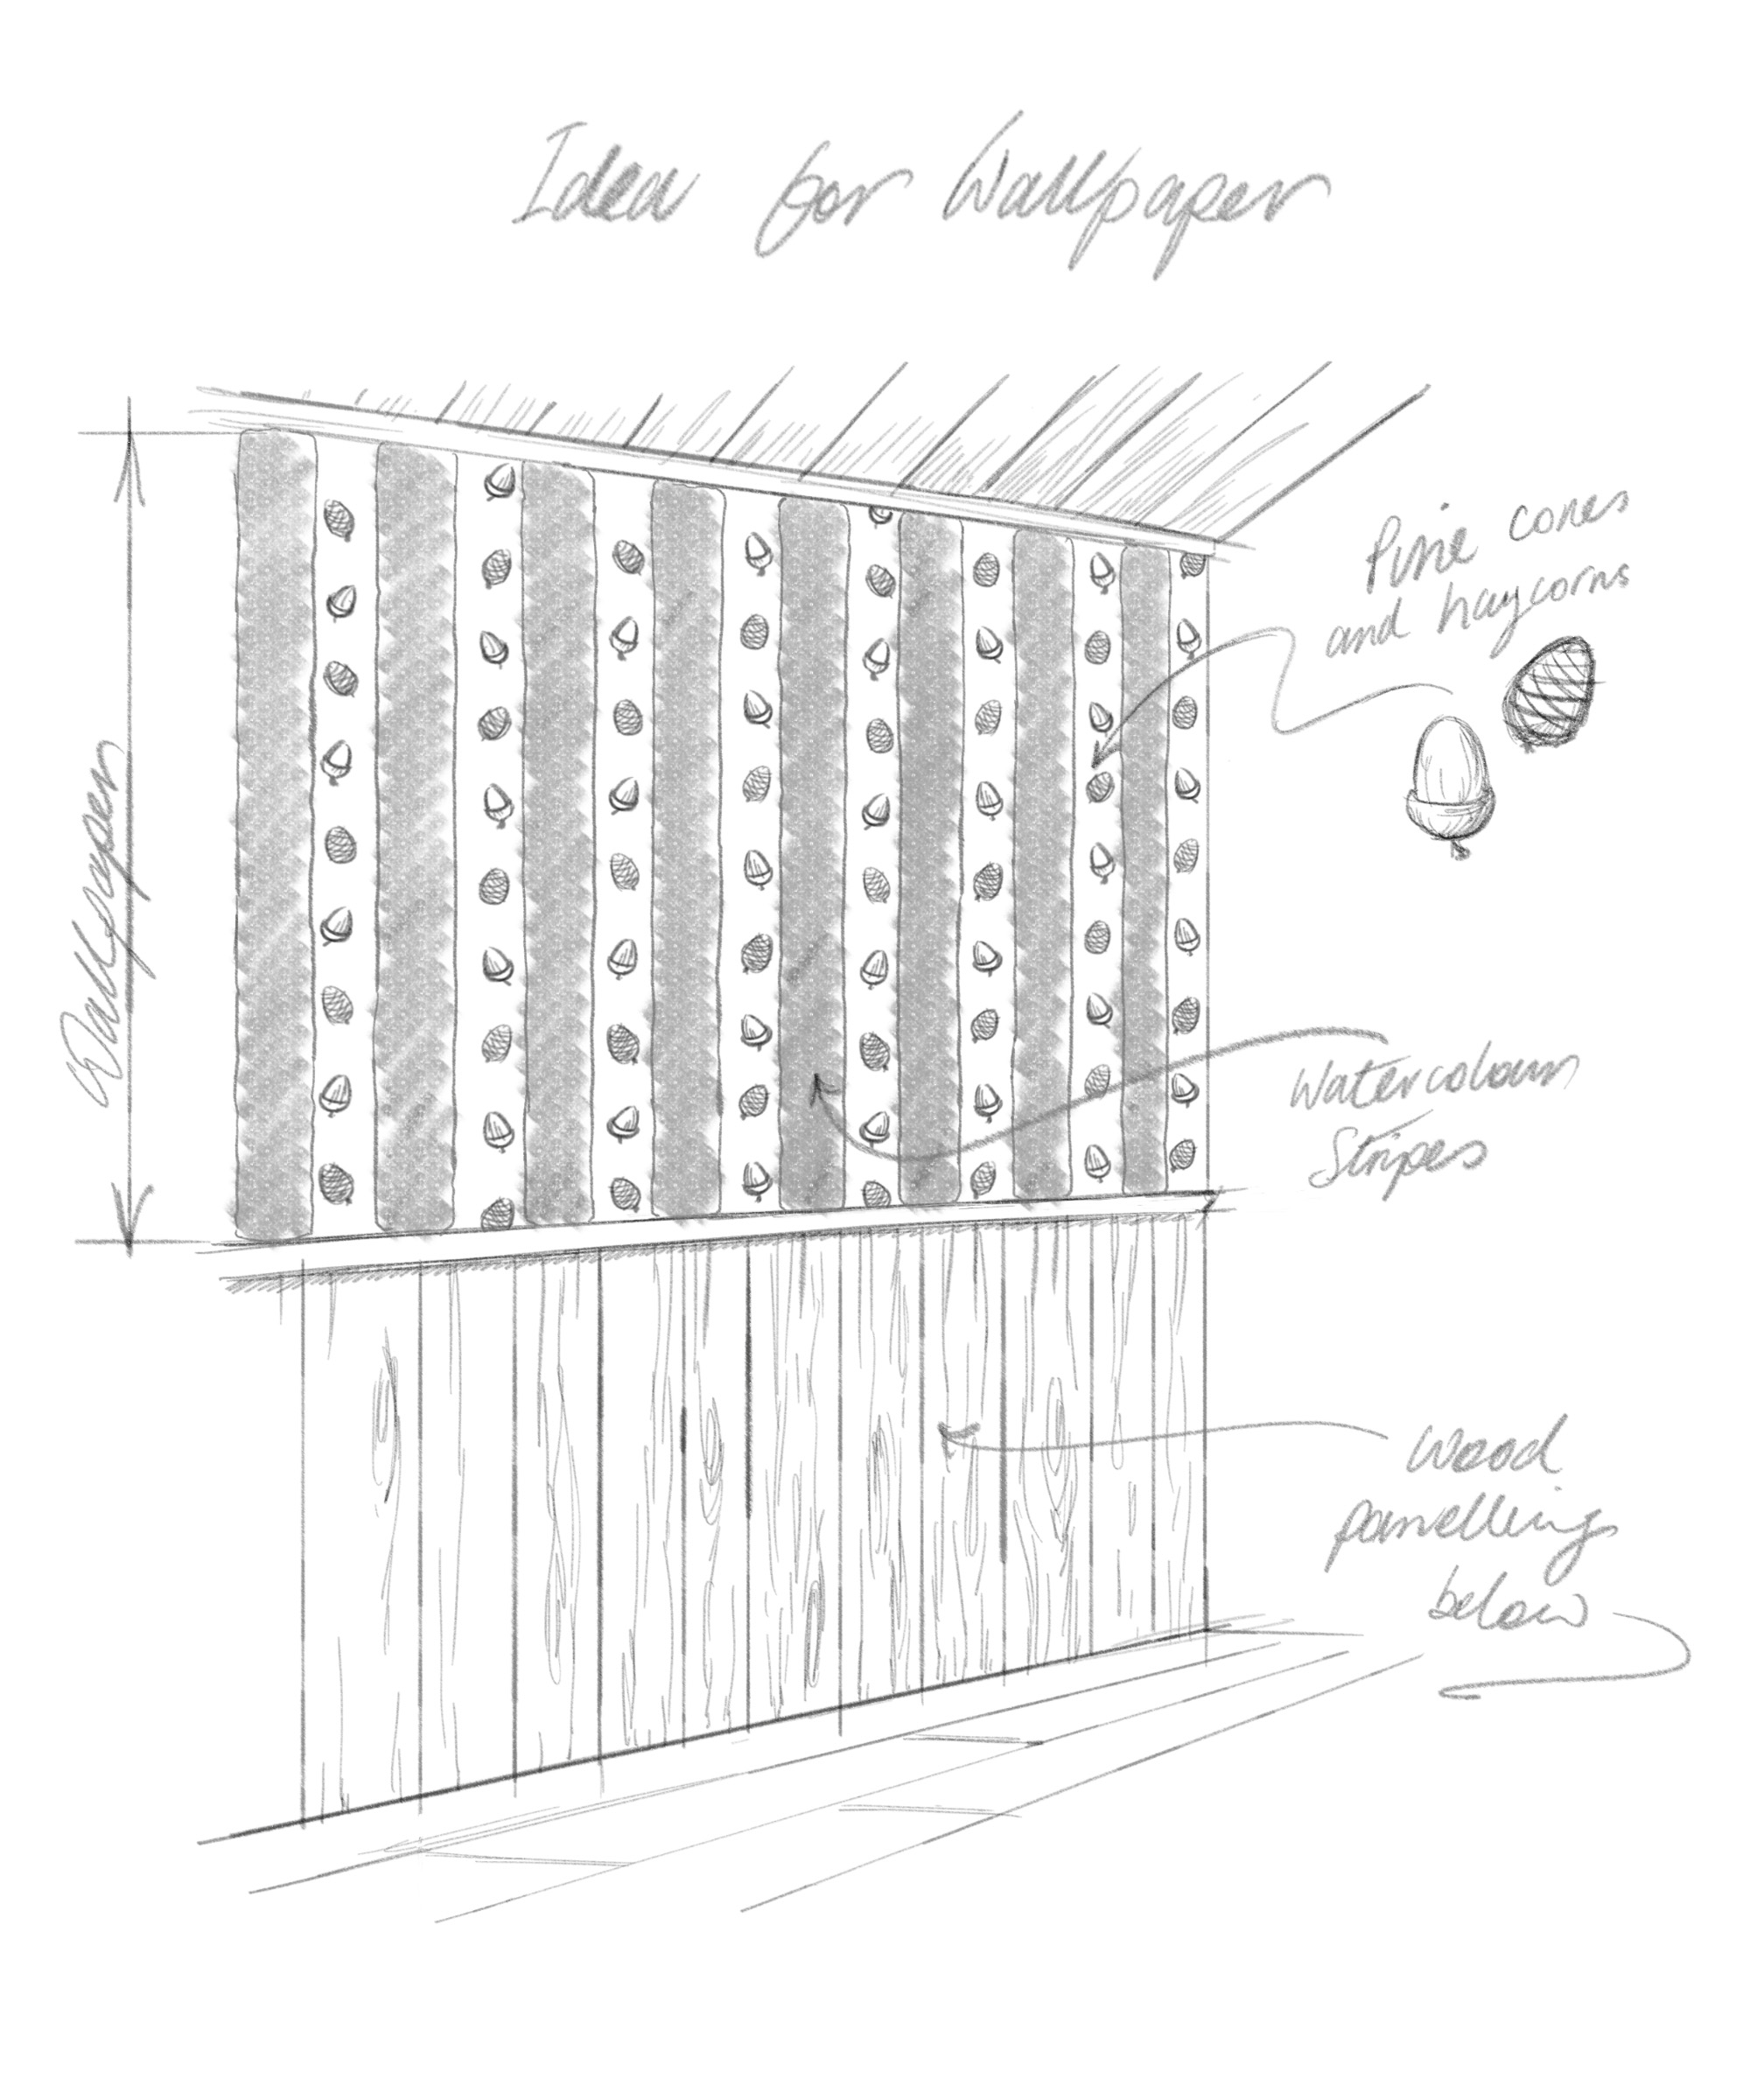 The design sketch for the acorn-patterned wallpaper.